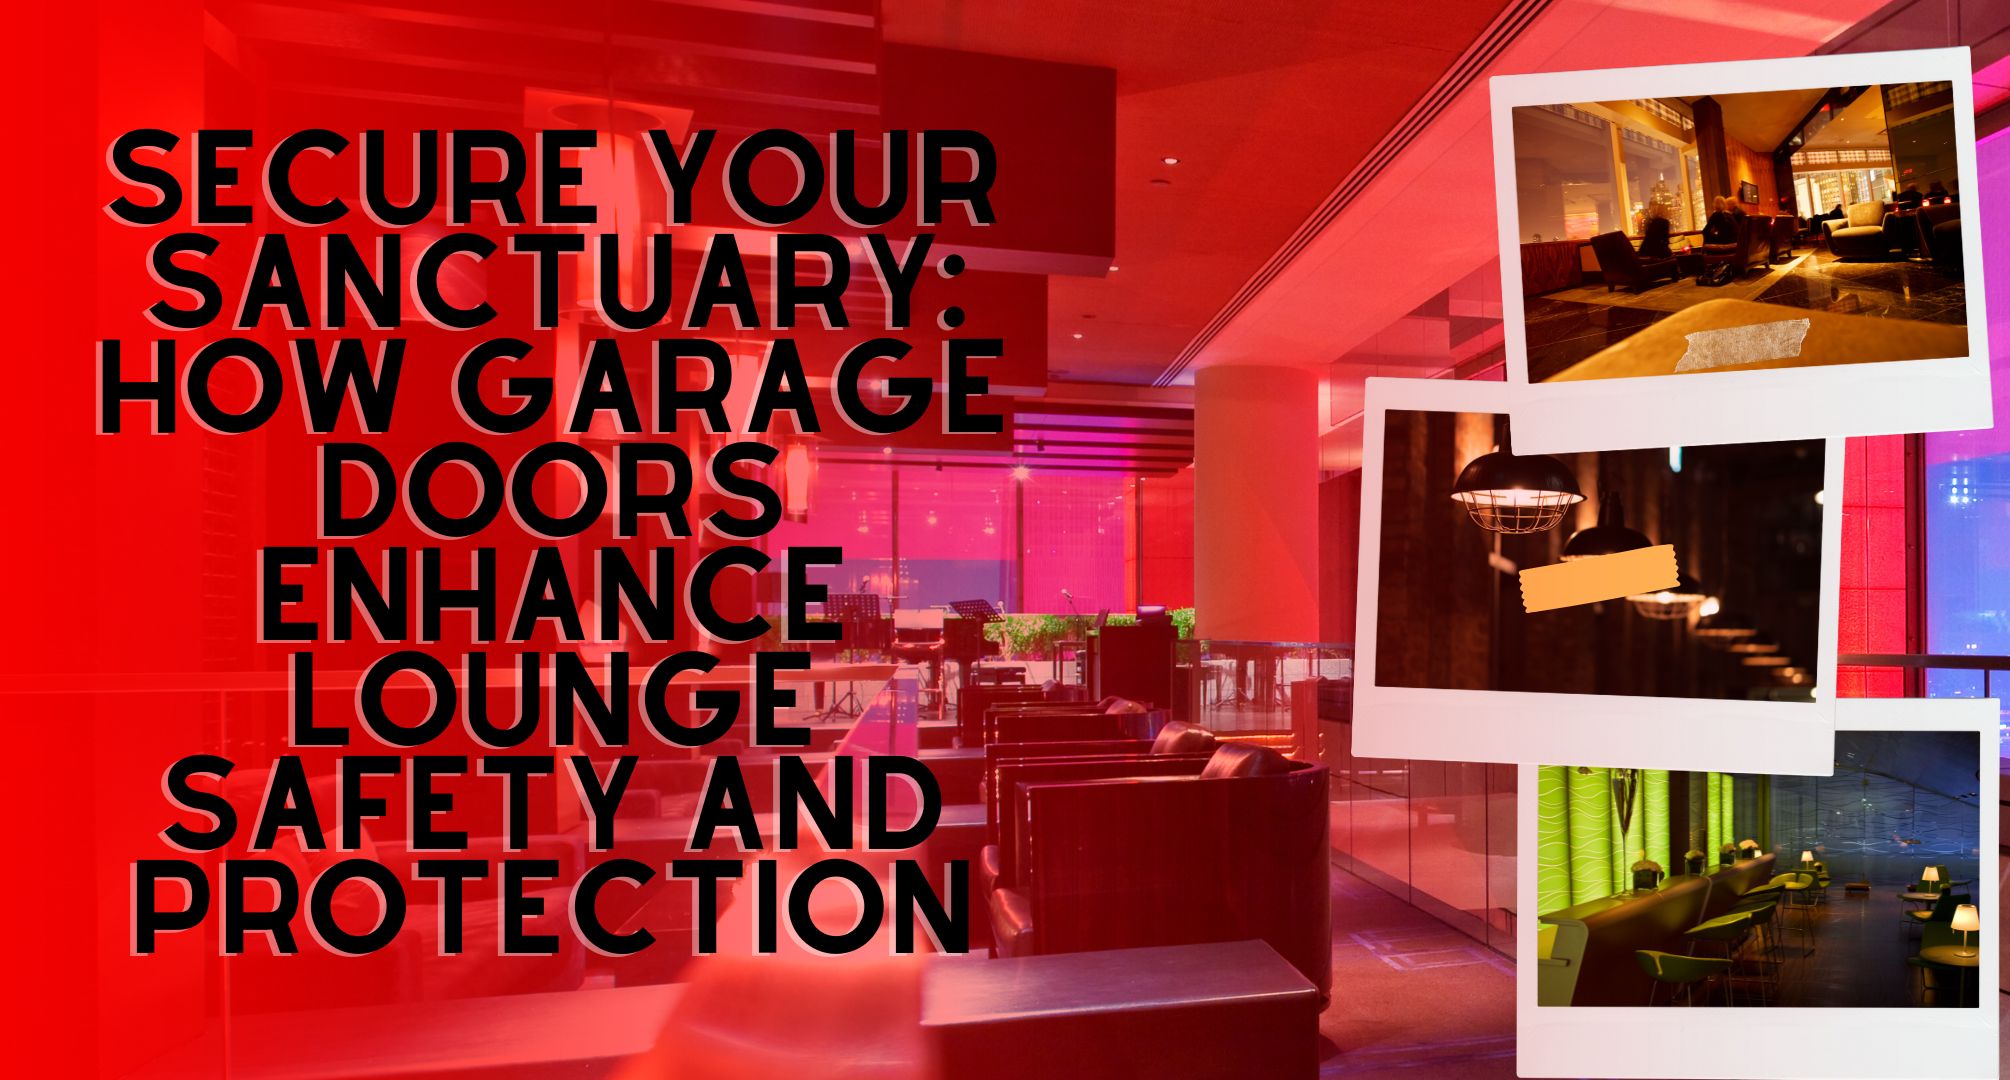 Secure Your Sanctuary: How Garage Doors Enhance Lounge Safety and Protection